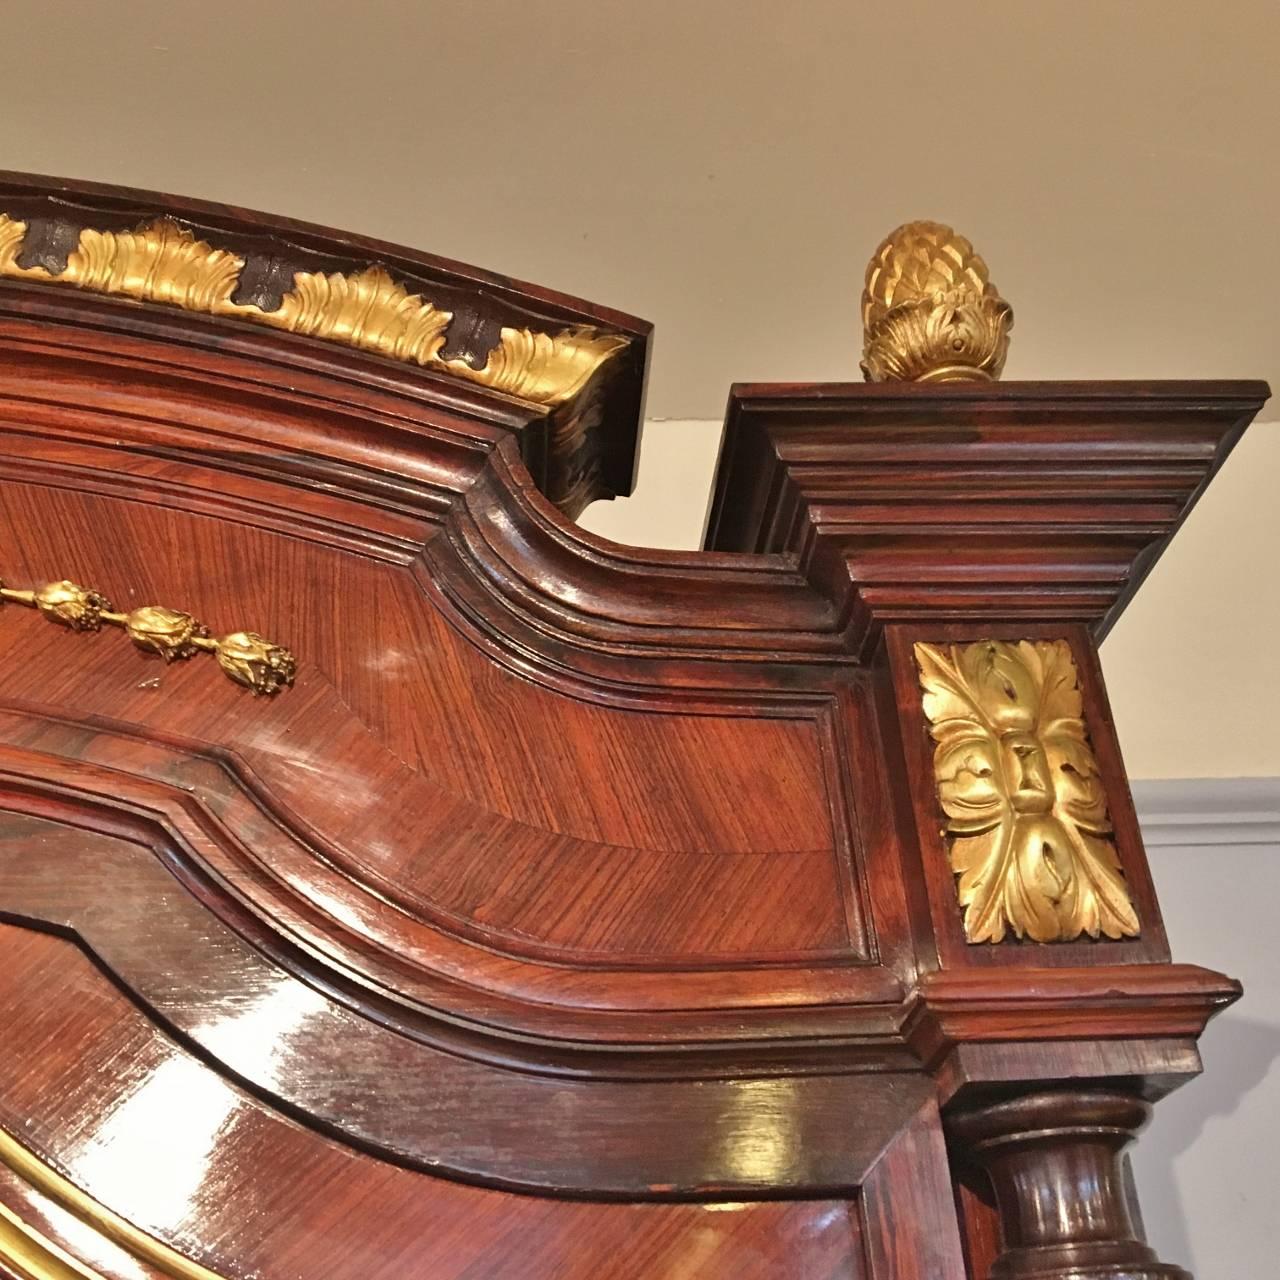 A most impressive rosewood library bookcase with ormolu and gilded mouldings.

This delightful bookcase has five substantial and adjustable shelves with great depth and has the benefit of a deep drawer in the base. The door retains its original